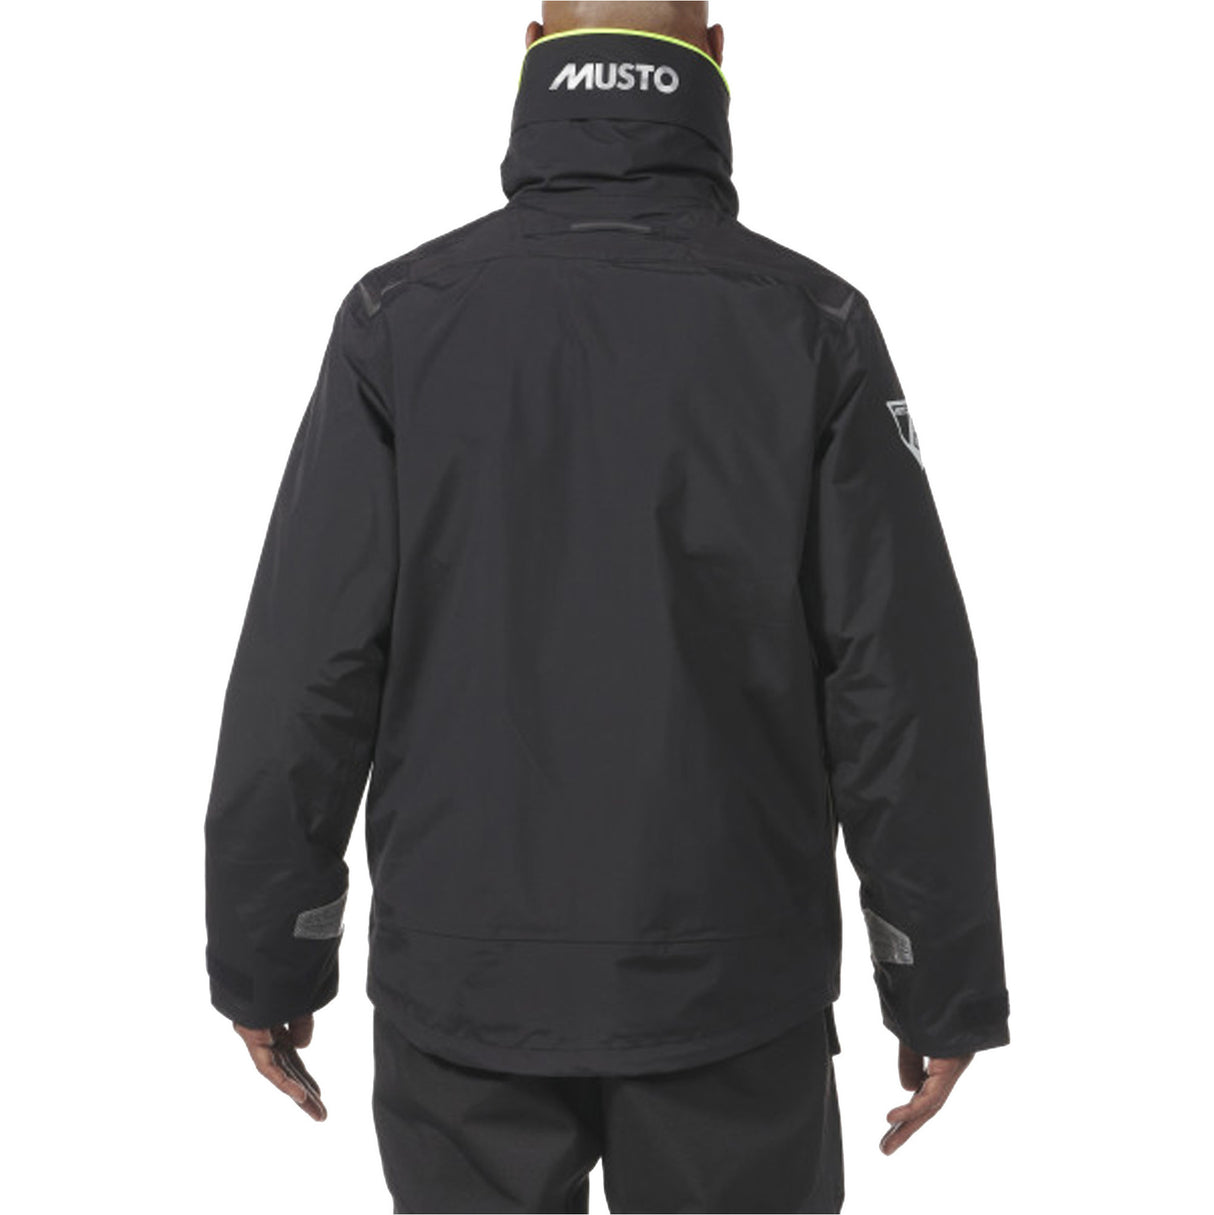 MUSTO MENS BR1 CHANNEL JACKET